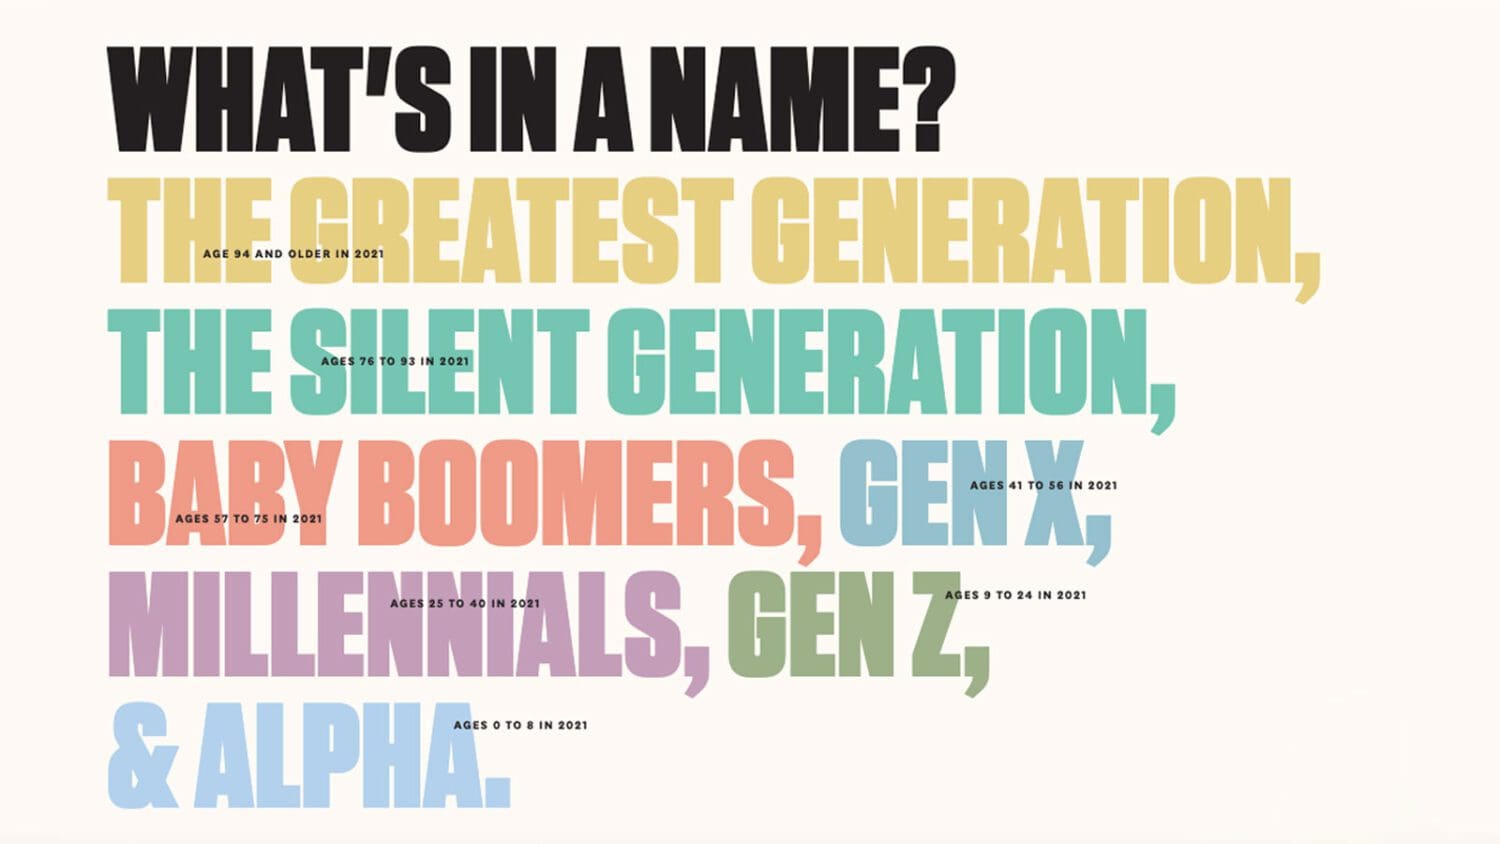 What’s in a Name? Boomers and Zoomers can define age groups yet defy stereotypes